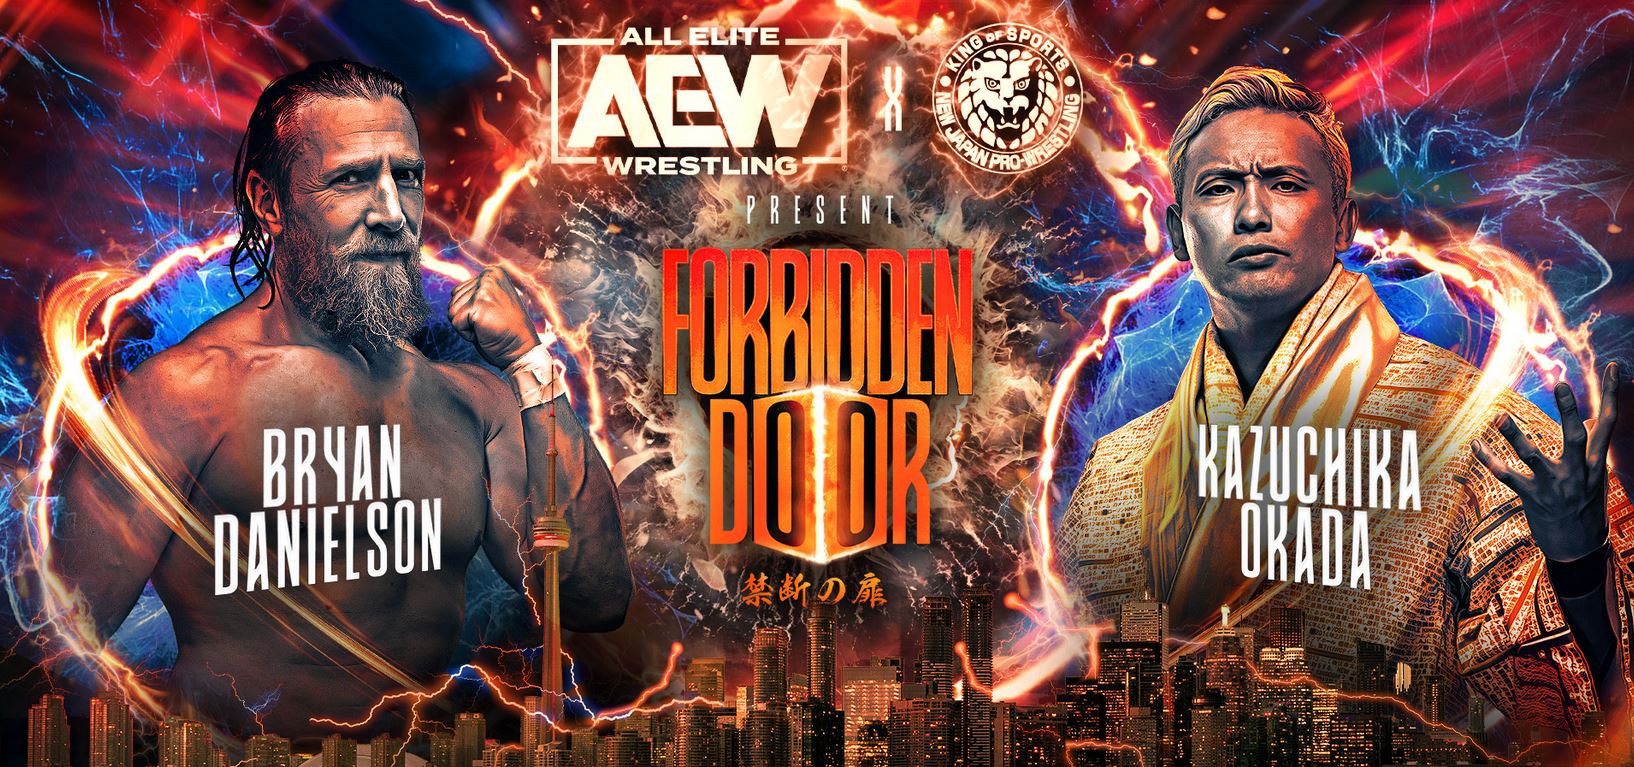 Backstage Notes On AEW x NJPW Forbidden Door 2 and Latest Viewership